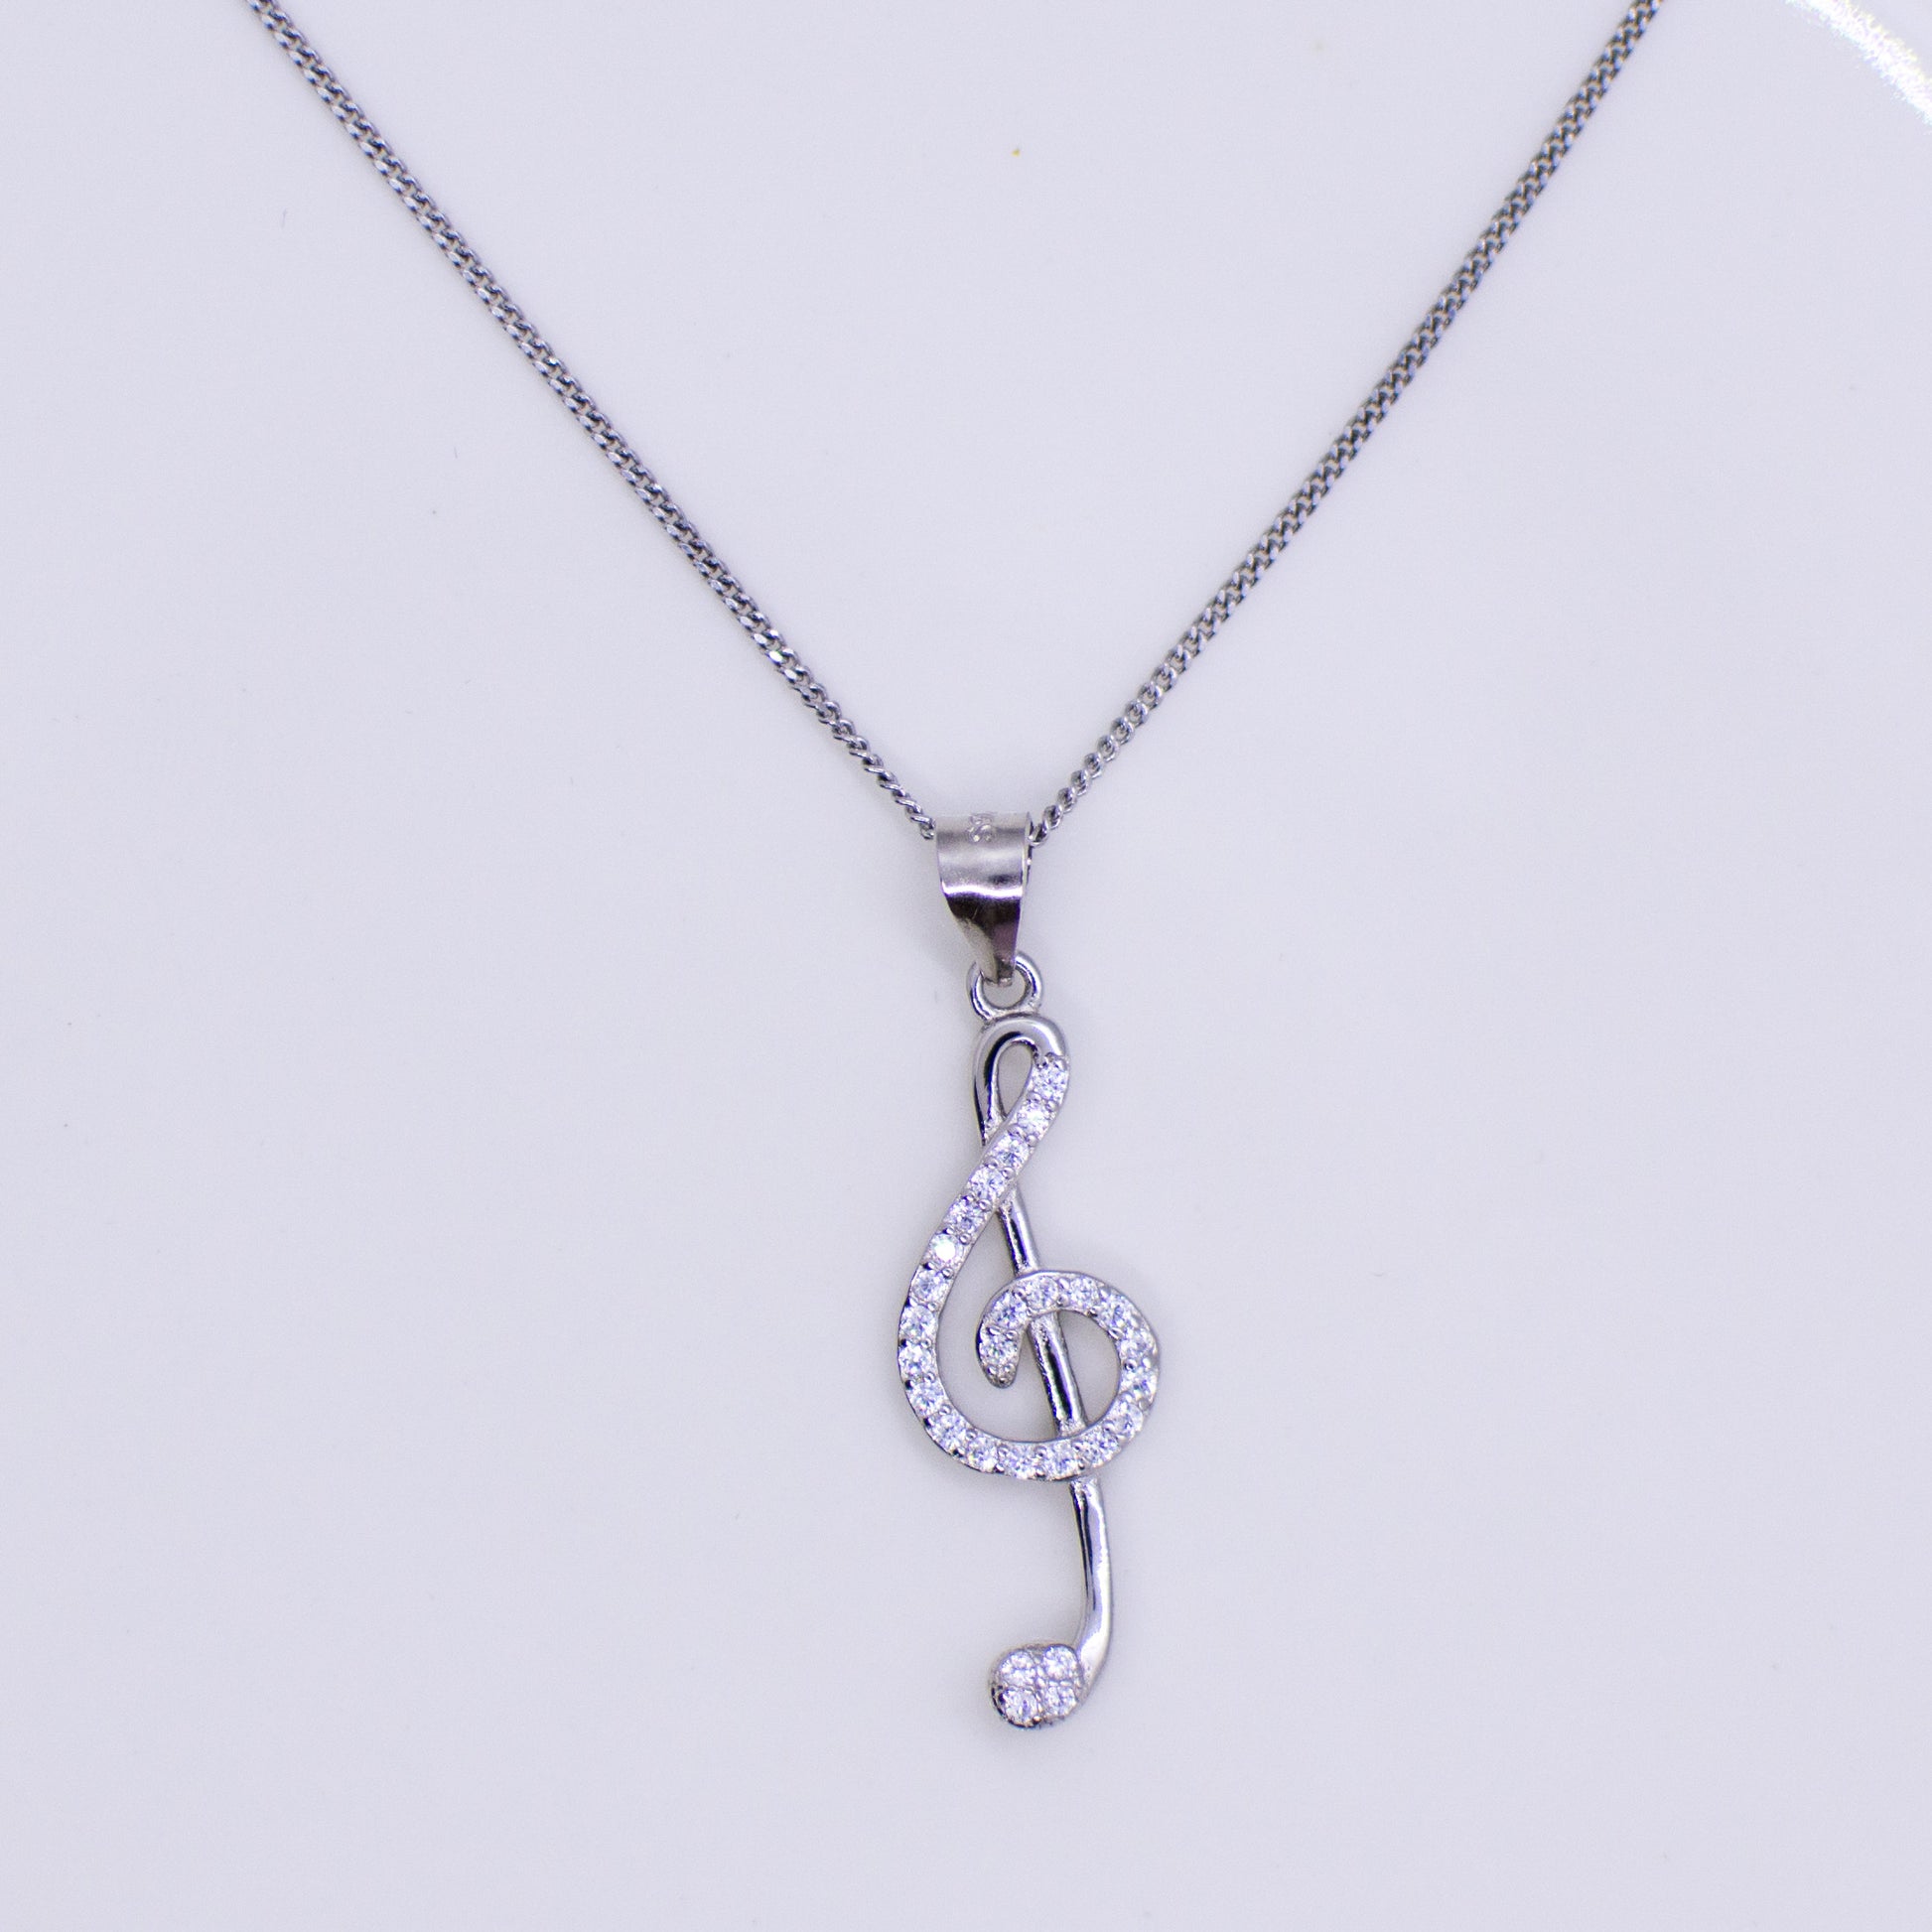 Silver CZ set Treble Clef pendant and chain This pretty Treble Clef is set with with glittering cubic zirconia stones.  An ideal necklace choice for music lovers of all ages. Product details: Product materials: 925 sterling silver, cubic zirconia Pendant dimensions:  33mm L x 9mm W Chain length: 44cm fine diamond cut curb chain